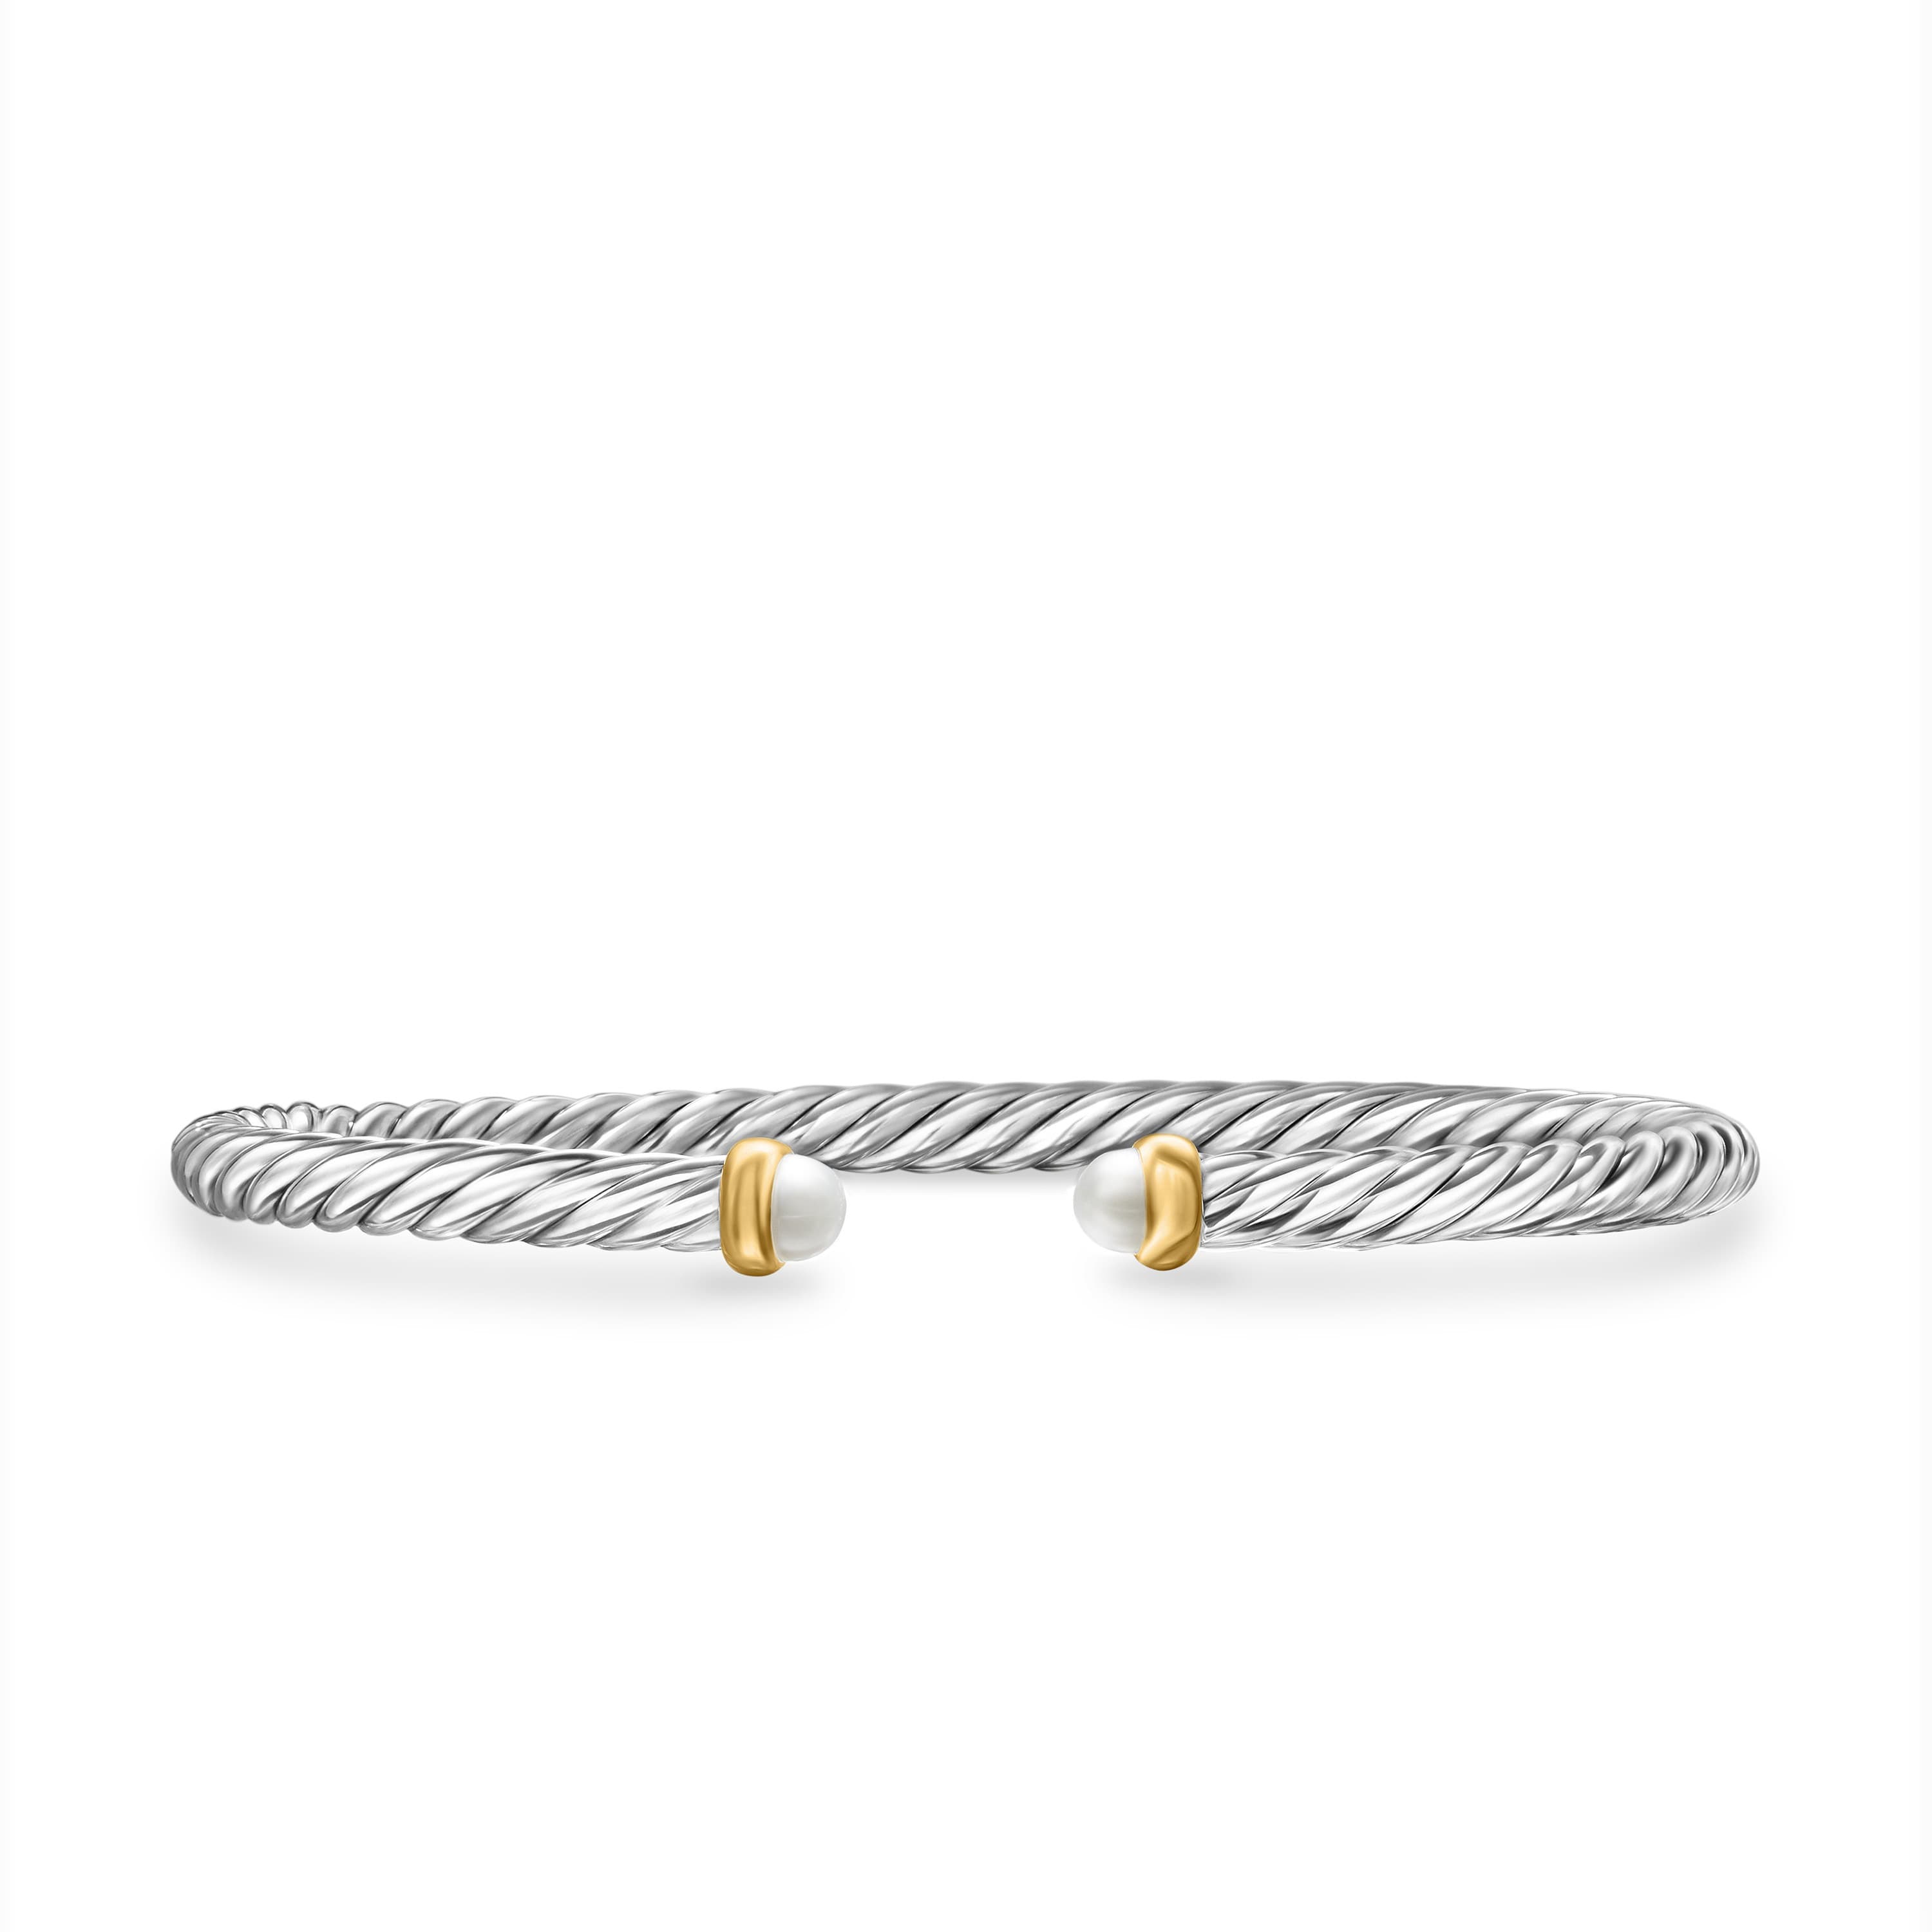 David Yurman Cable Flex Sterling Silver Bracelet with Pearl, Size Large